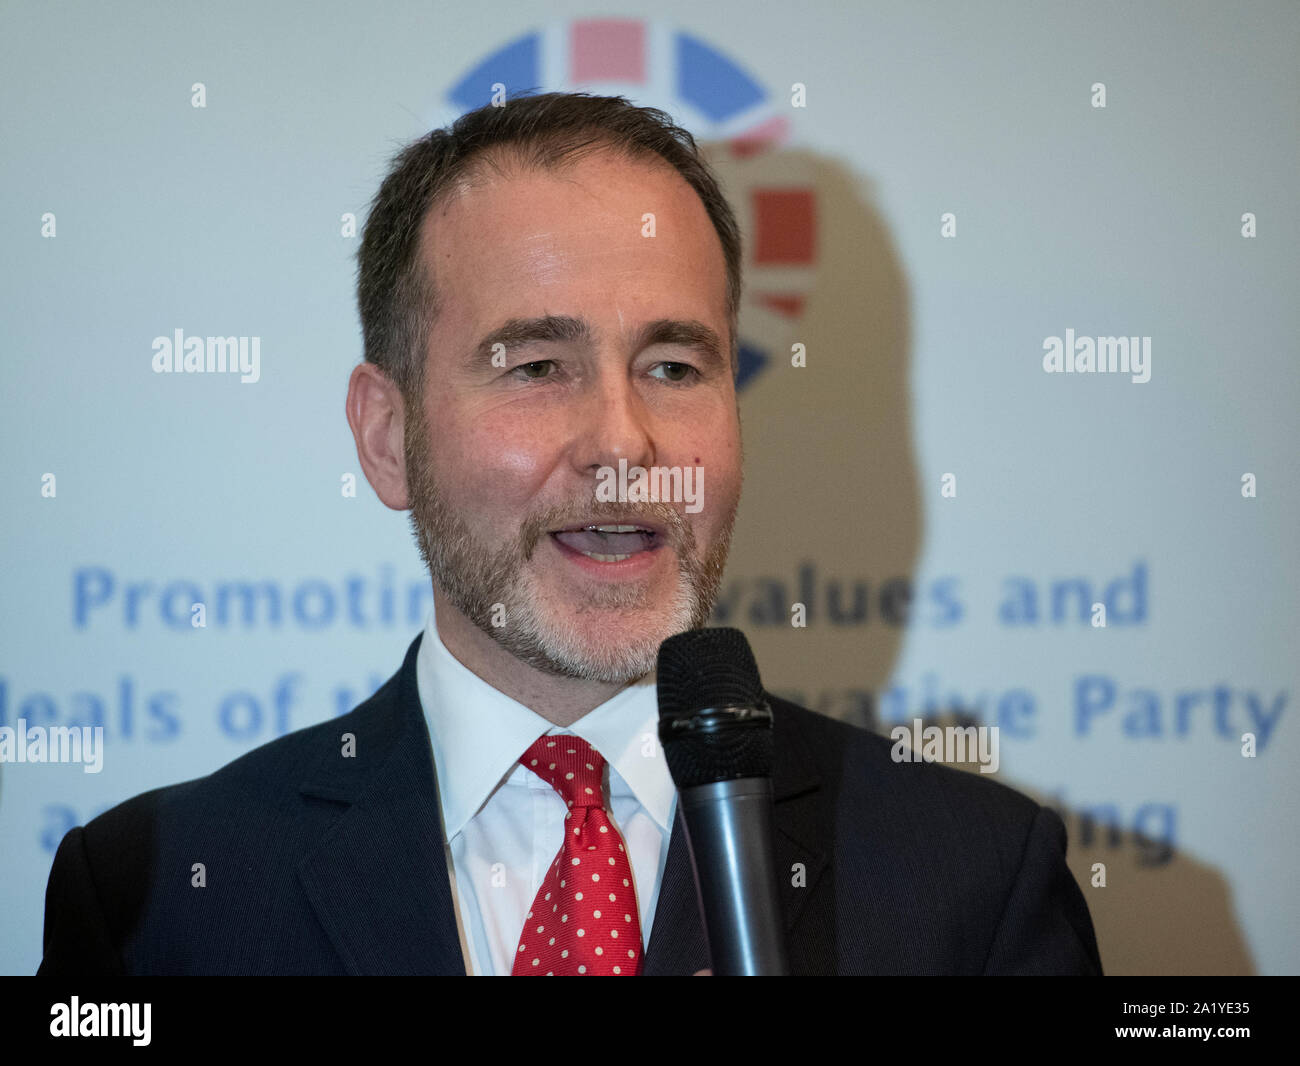 Manchester, UK. 29th September 2019. Christopher Pincher, Minister of State for Europe and the Americas and MP for Tamworth, speaks at the Conservative Friends of Cyprus Annual Reception  day one of the Conservative Party Conference in Manchester. © Russell Hart/Alamy Live News. Stock Photo